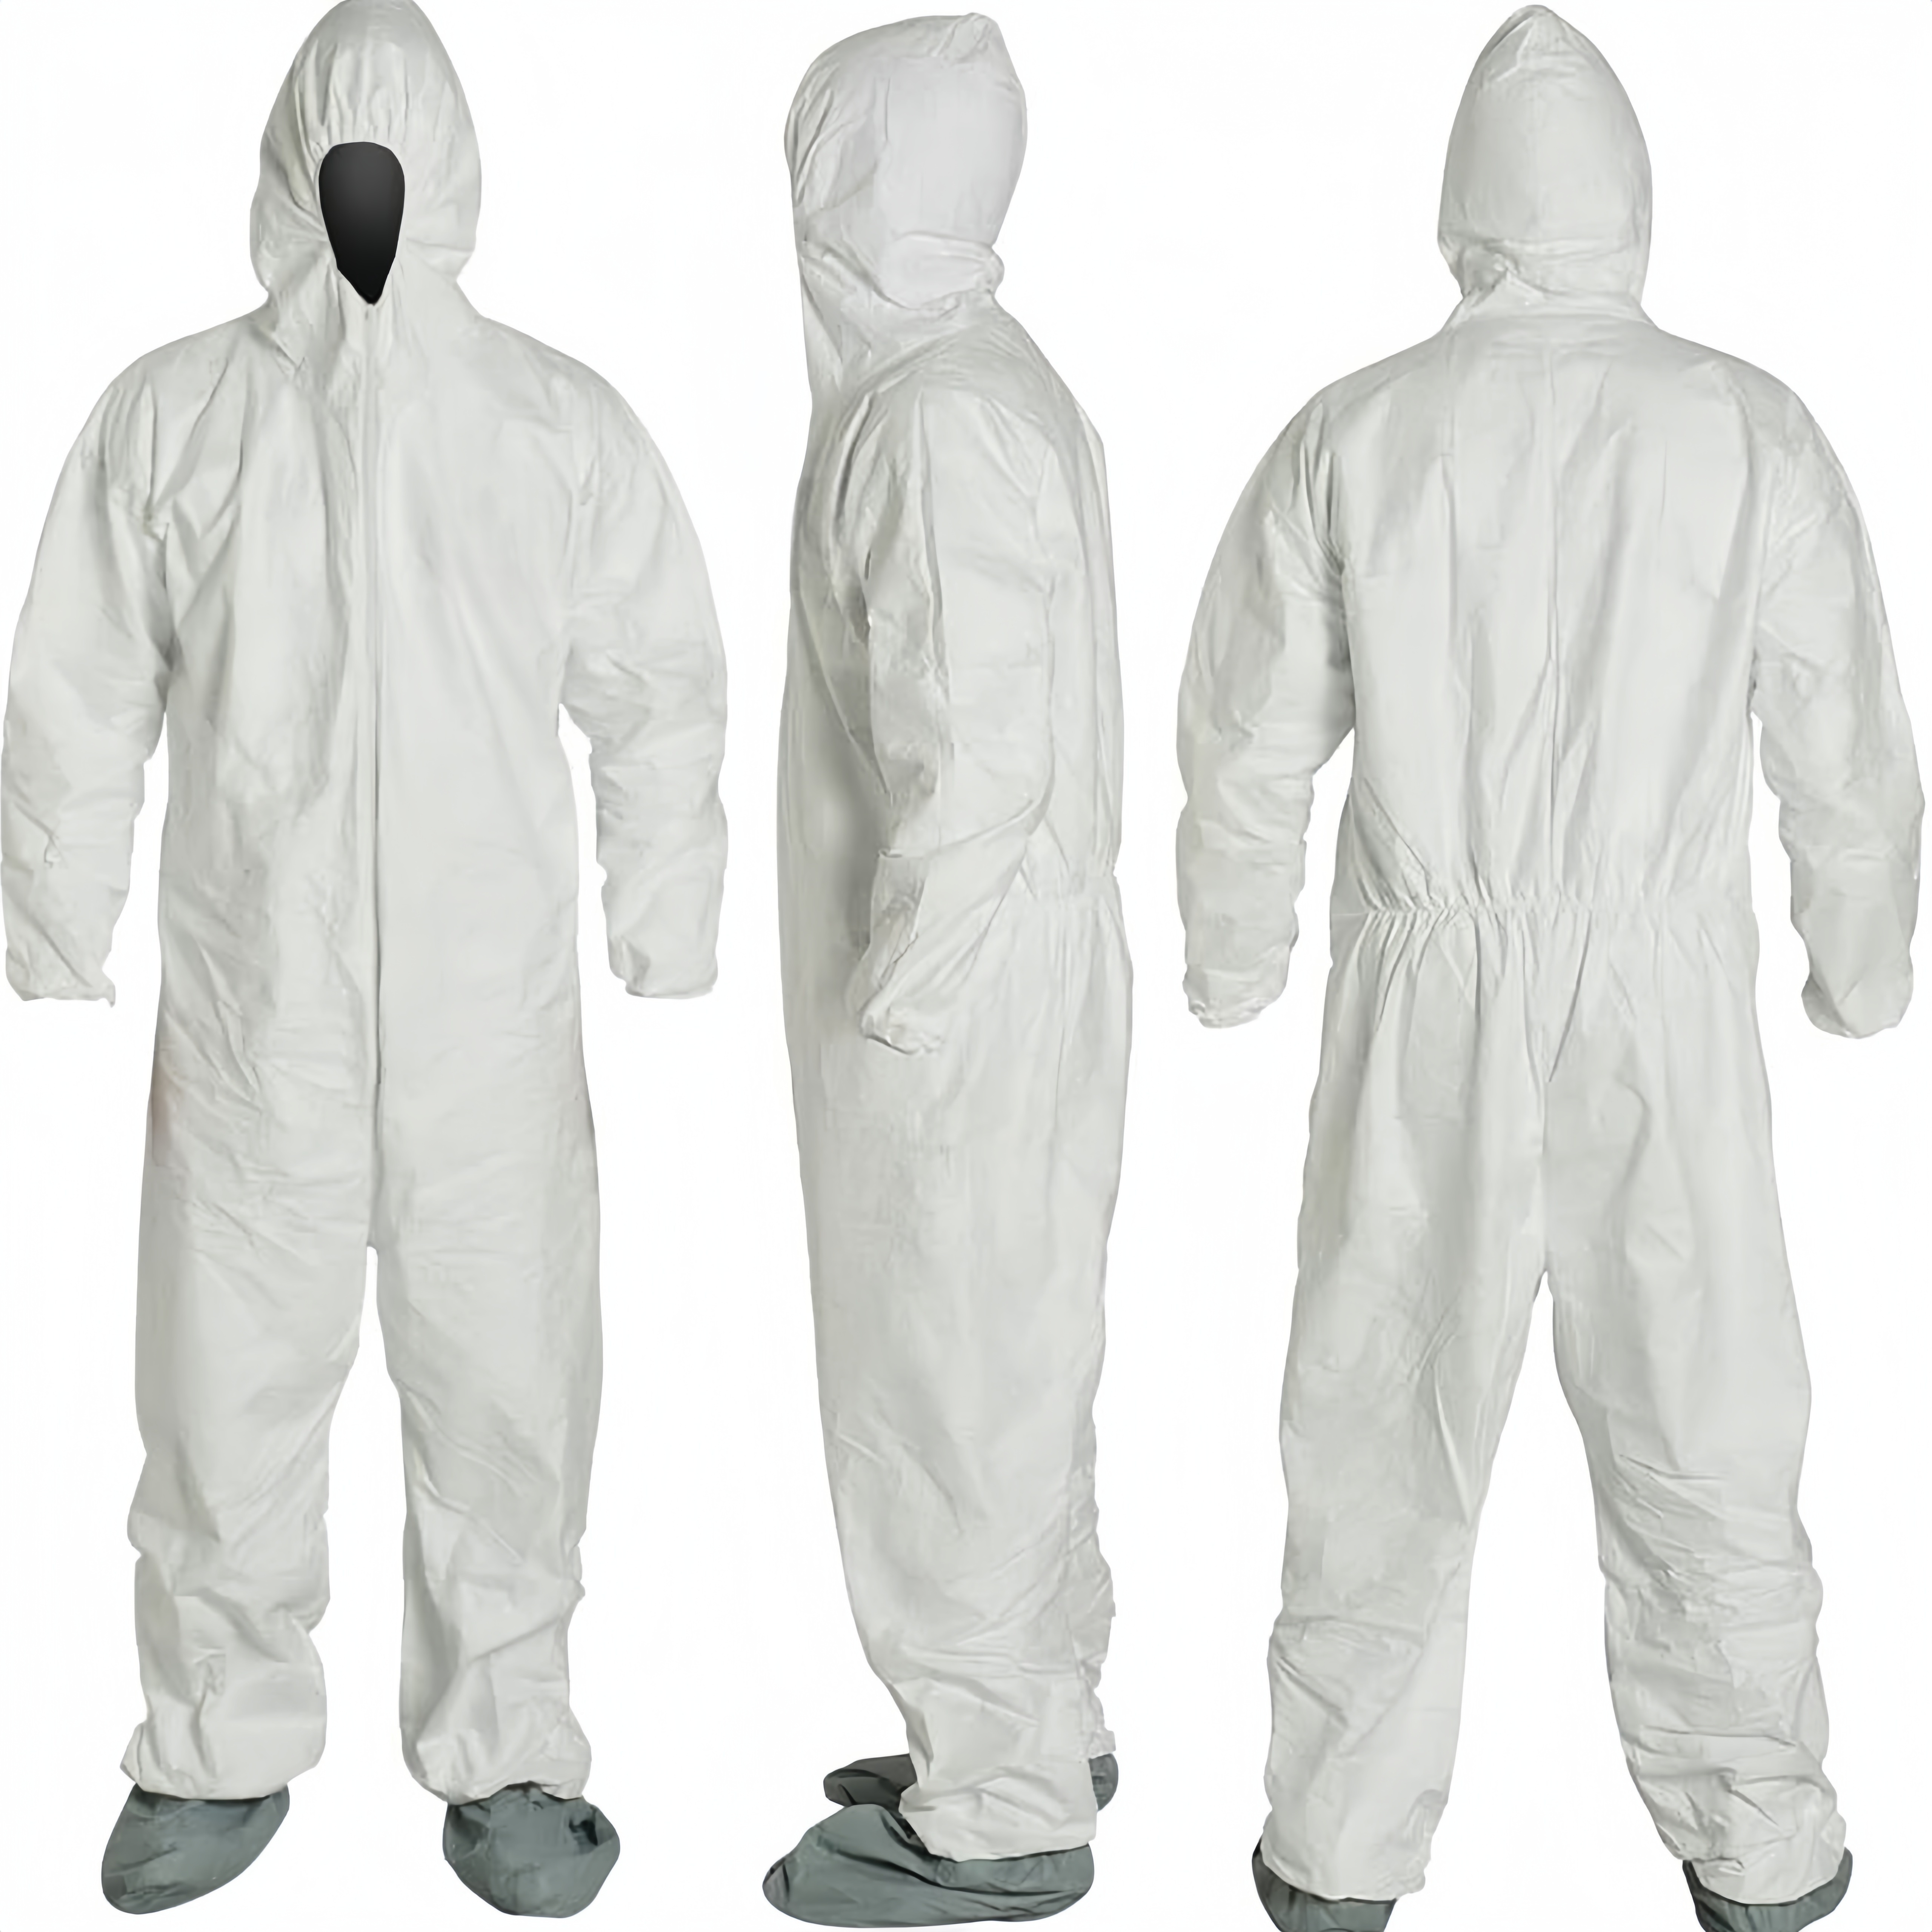 Disposable Hazmat Suits, Industrial Sewing Thread for Hospitals